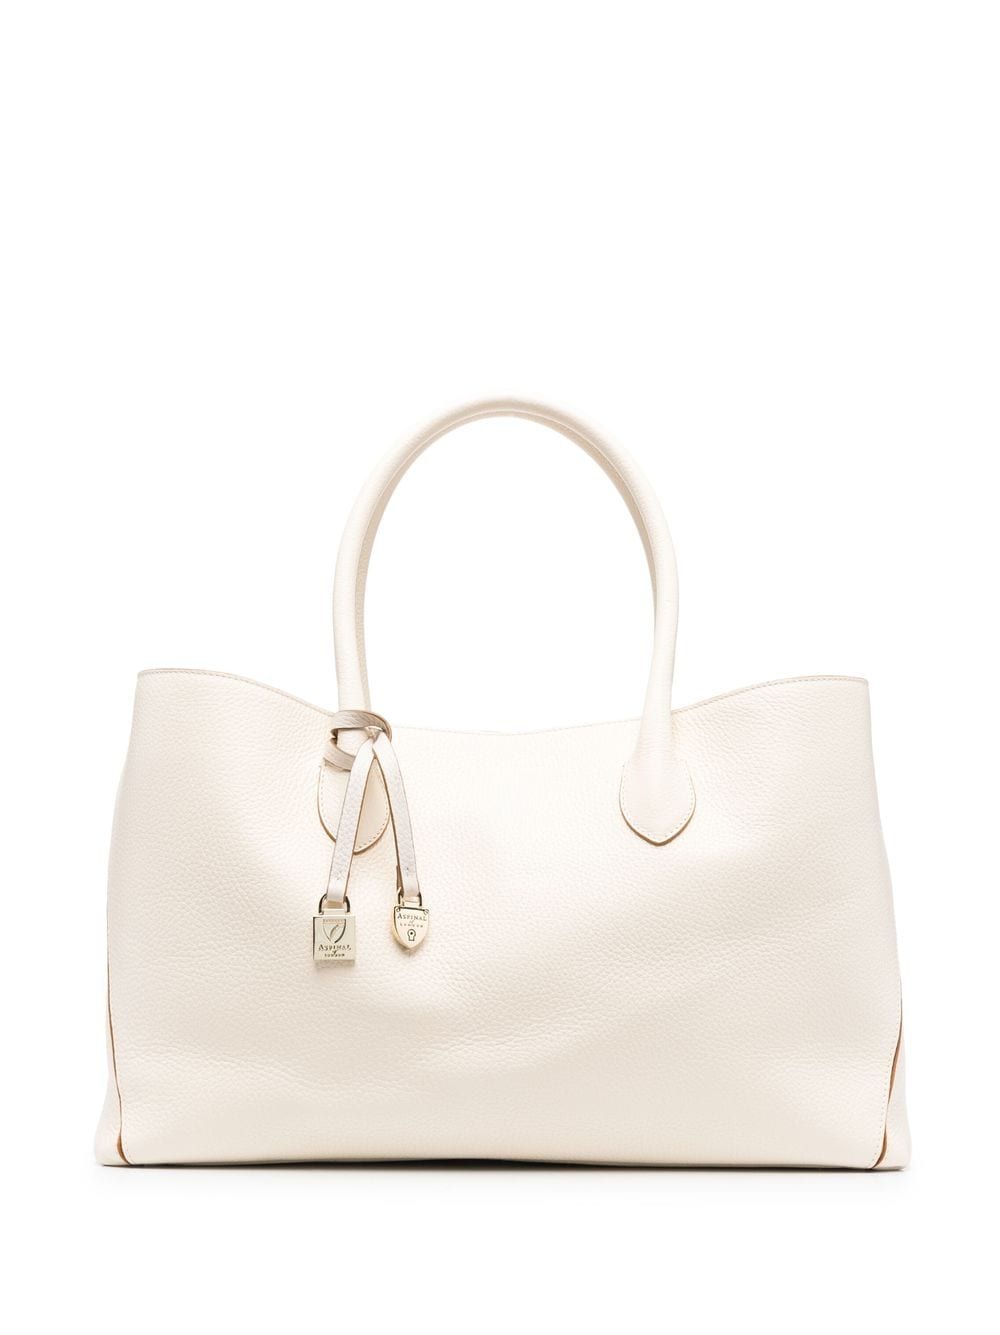 Aspinal Of London London Tote Bag In Neutrals